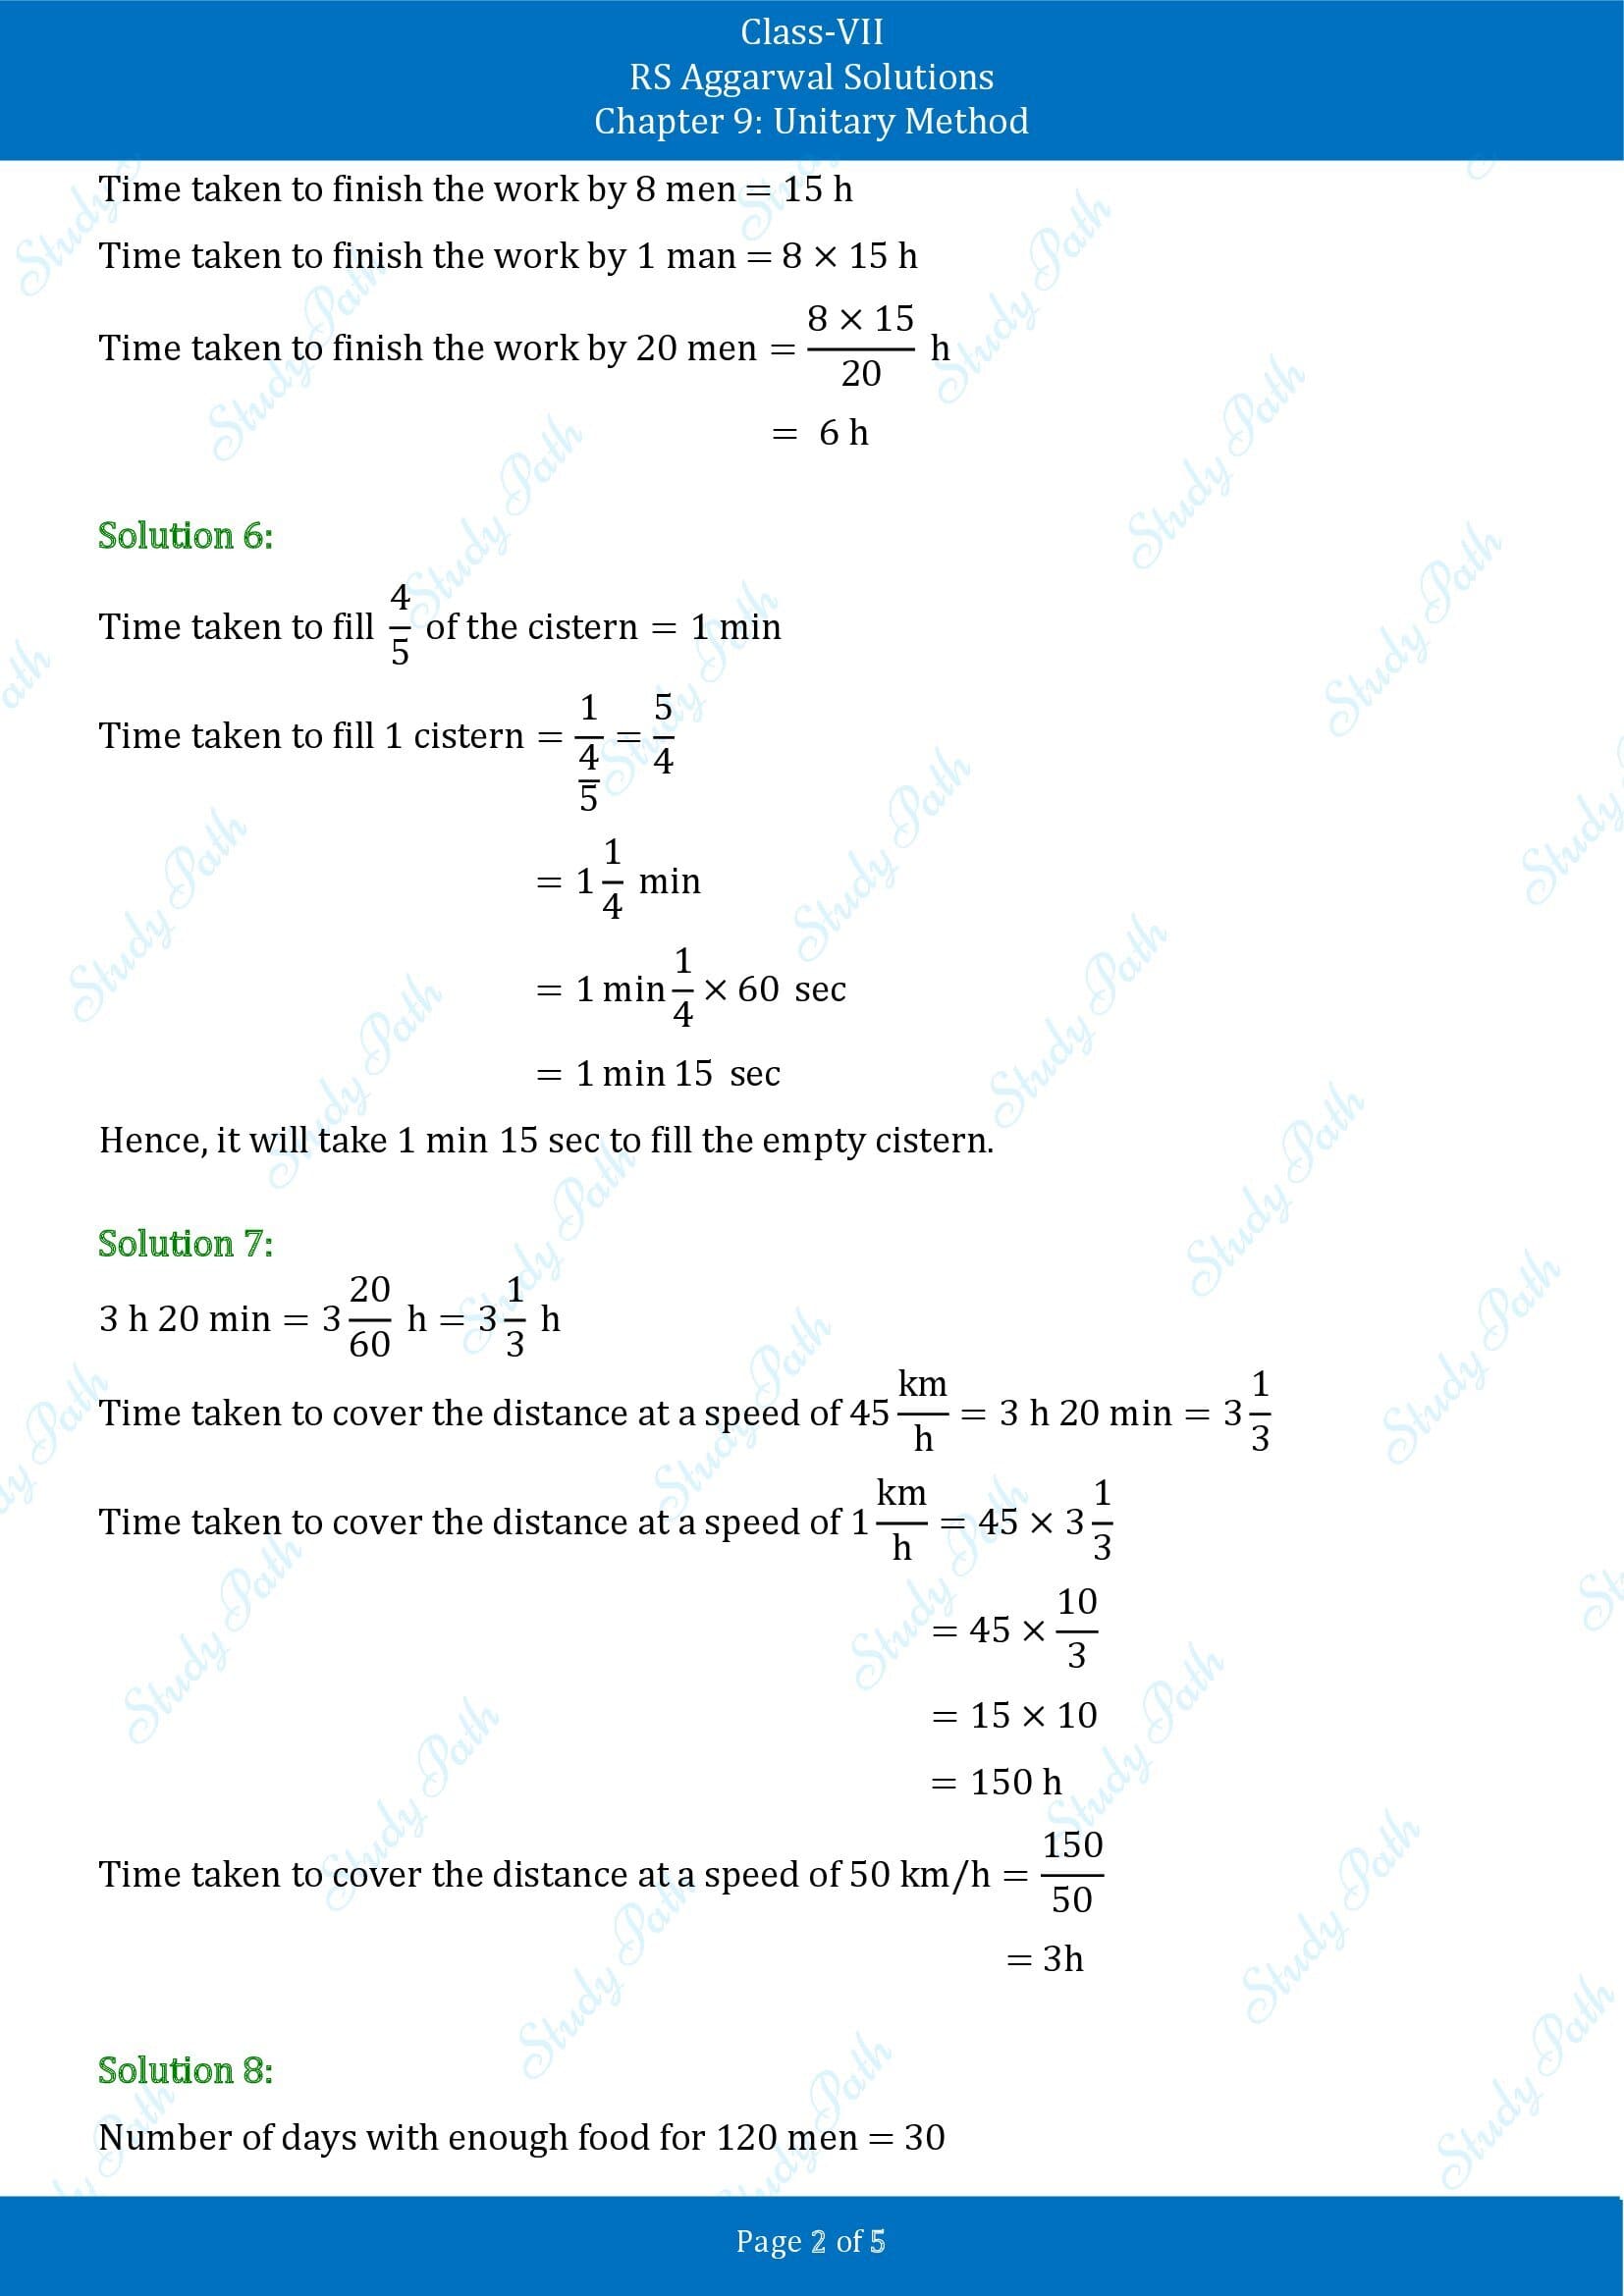 RS Aggarwal Solutions Class 7 Chapter 9 Unitary Method Test Paper 00002